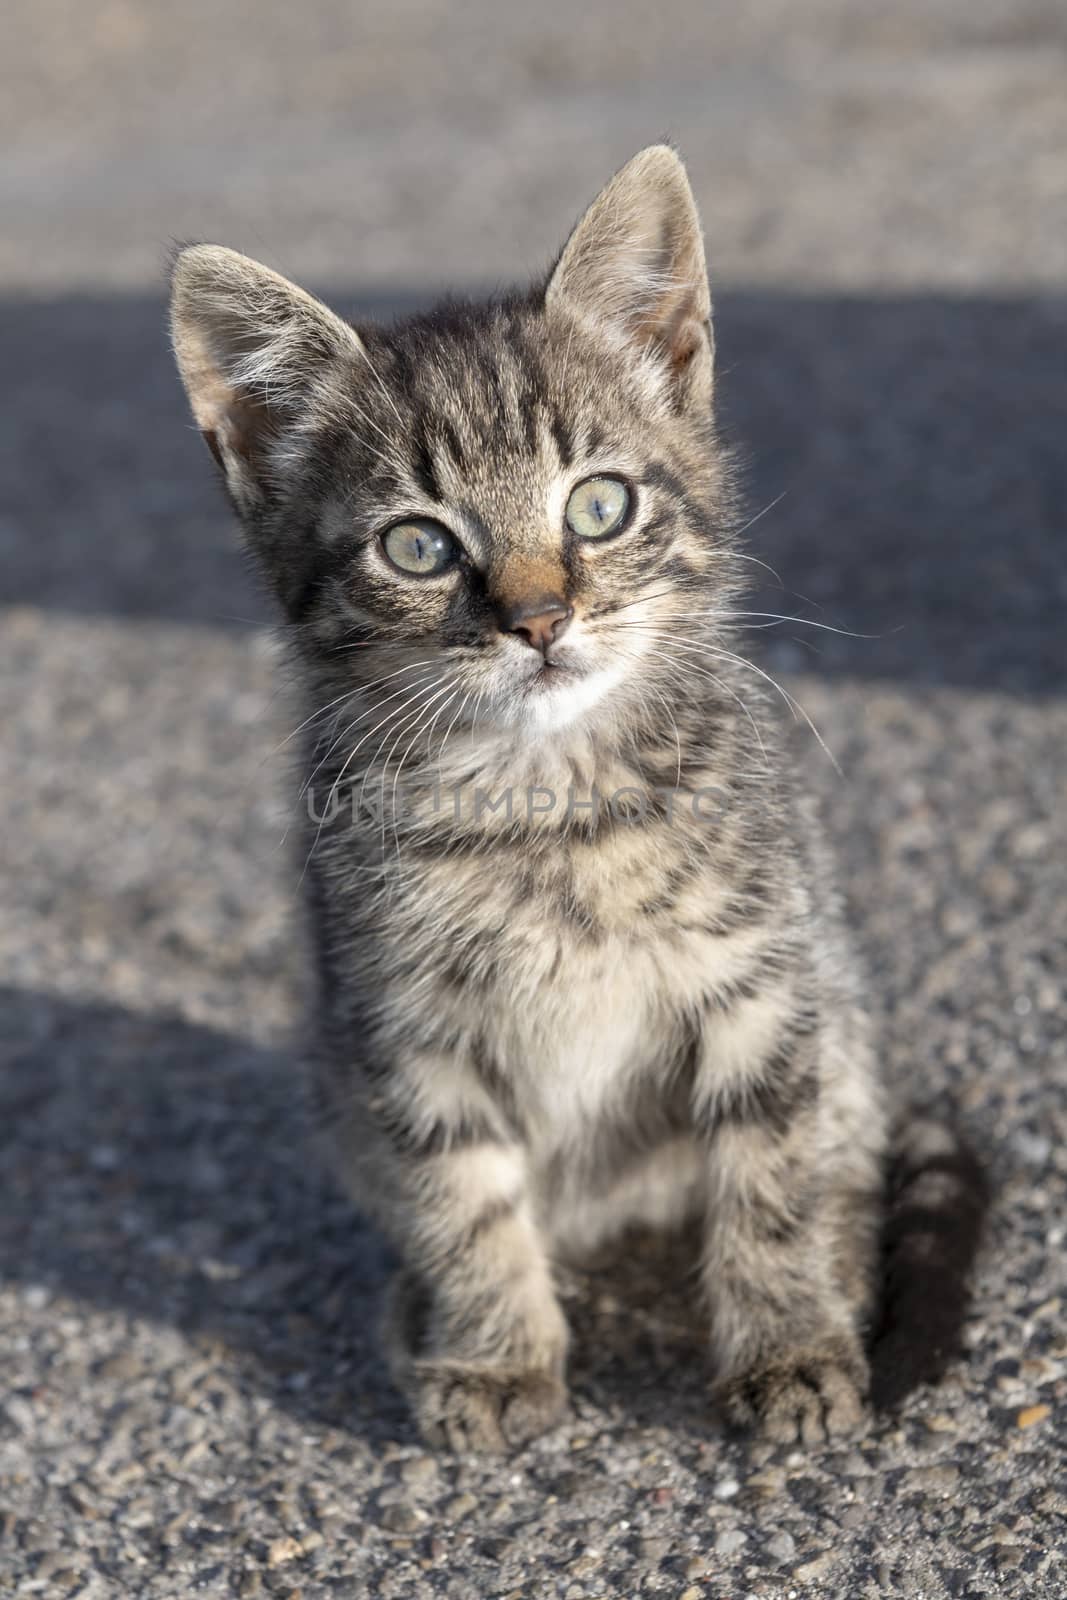 Young kitten on a farm looking curious at the camera
